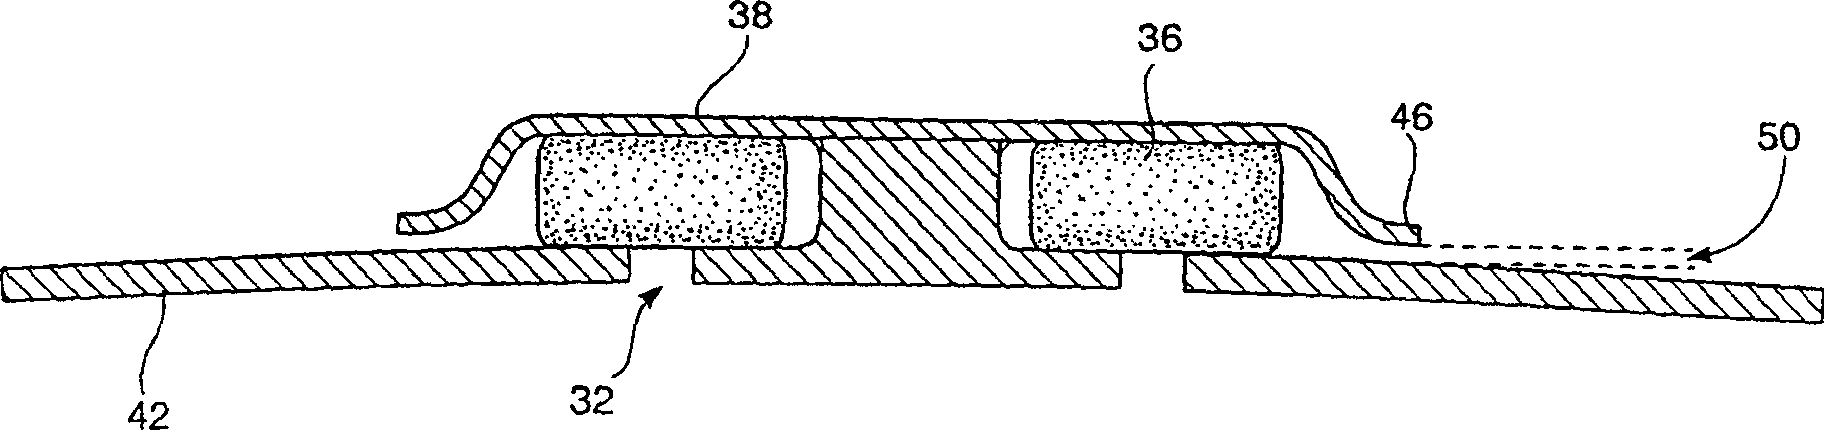 Electrochemical cell safety vent